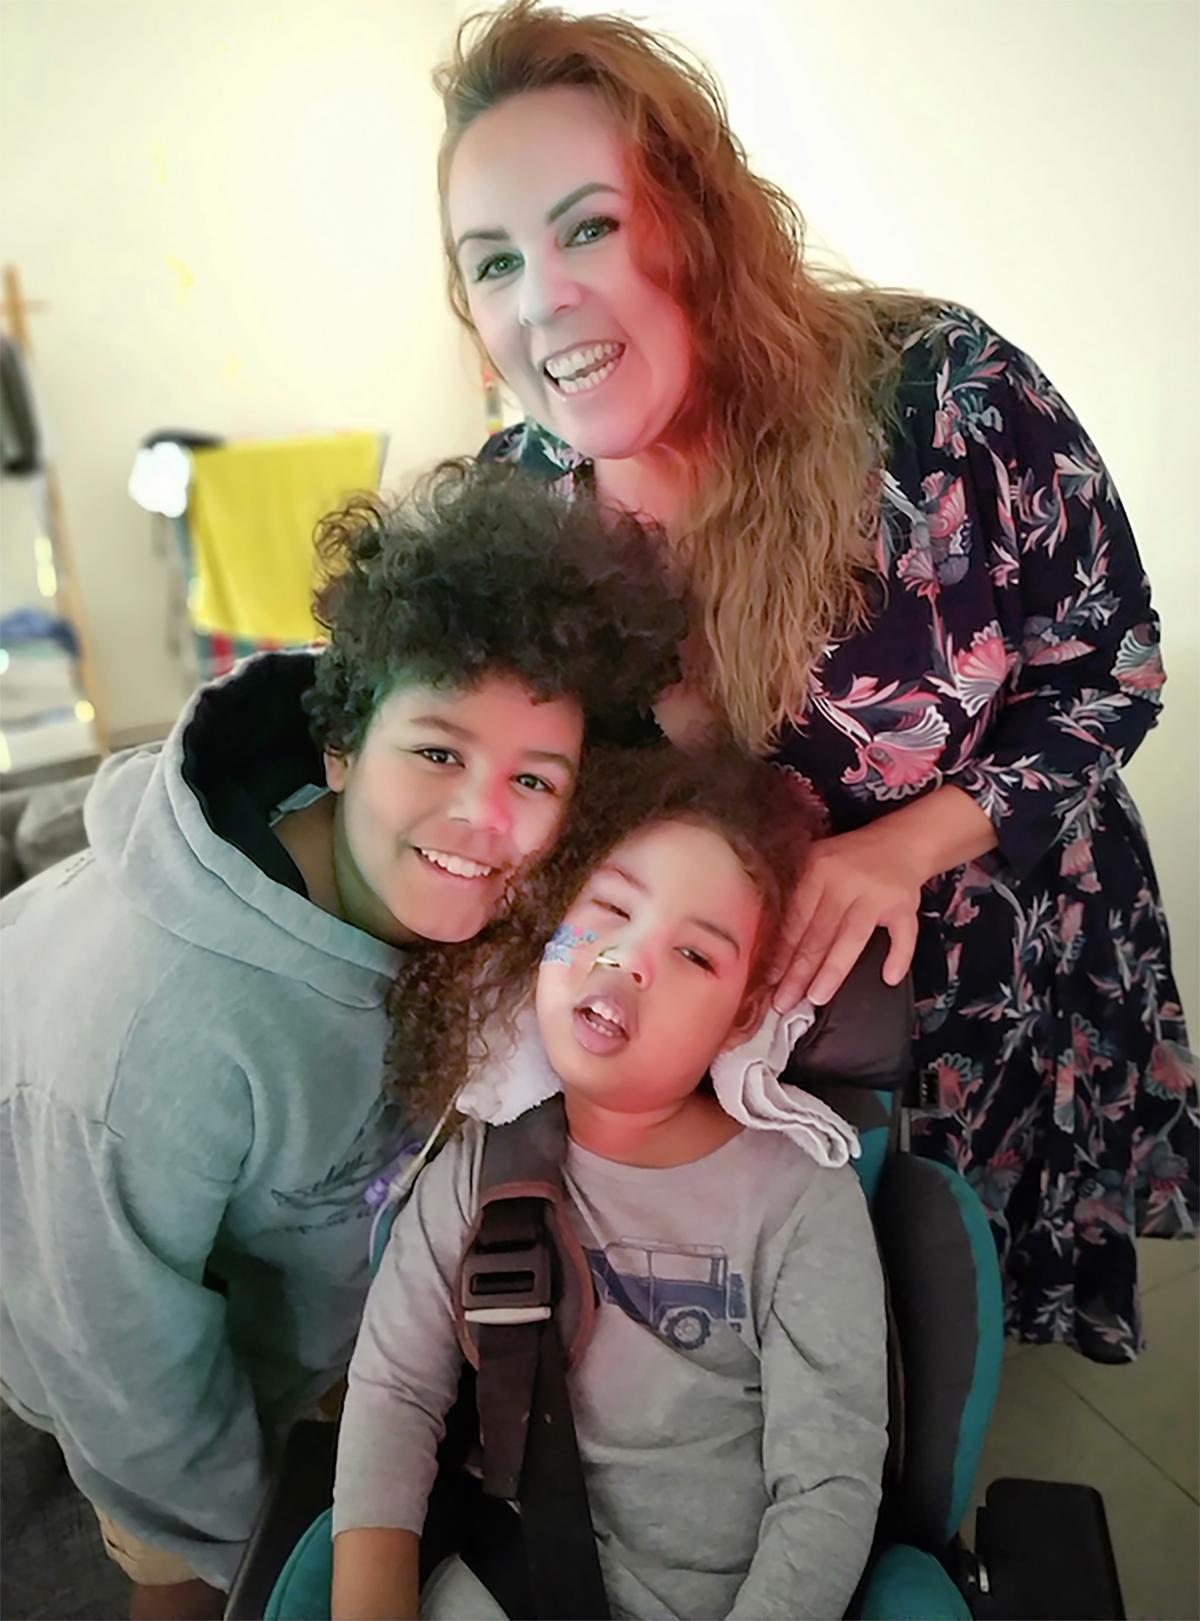 Rebecca Marsh, 41, with her two sons, Khaleed (L), 11, and Jahleel, 4. (Caters News)